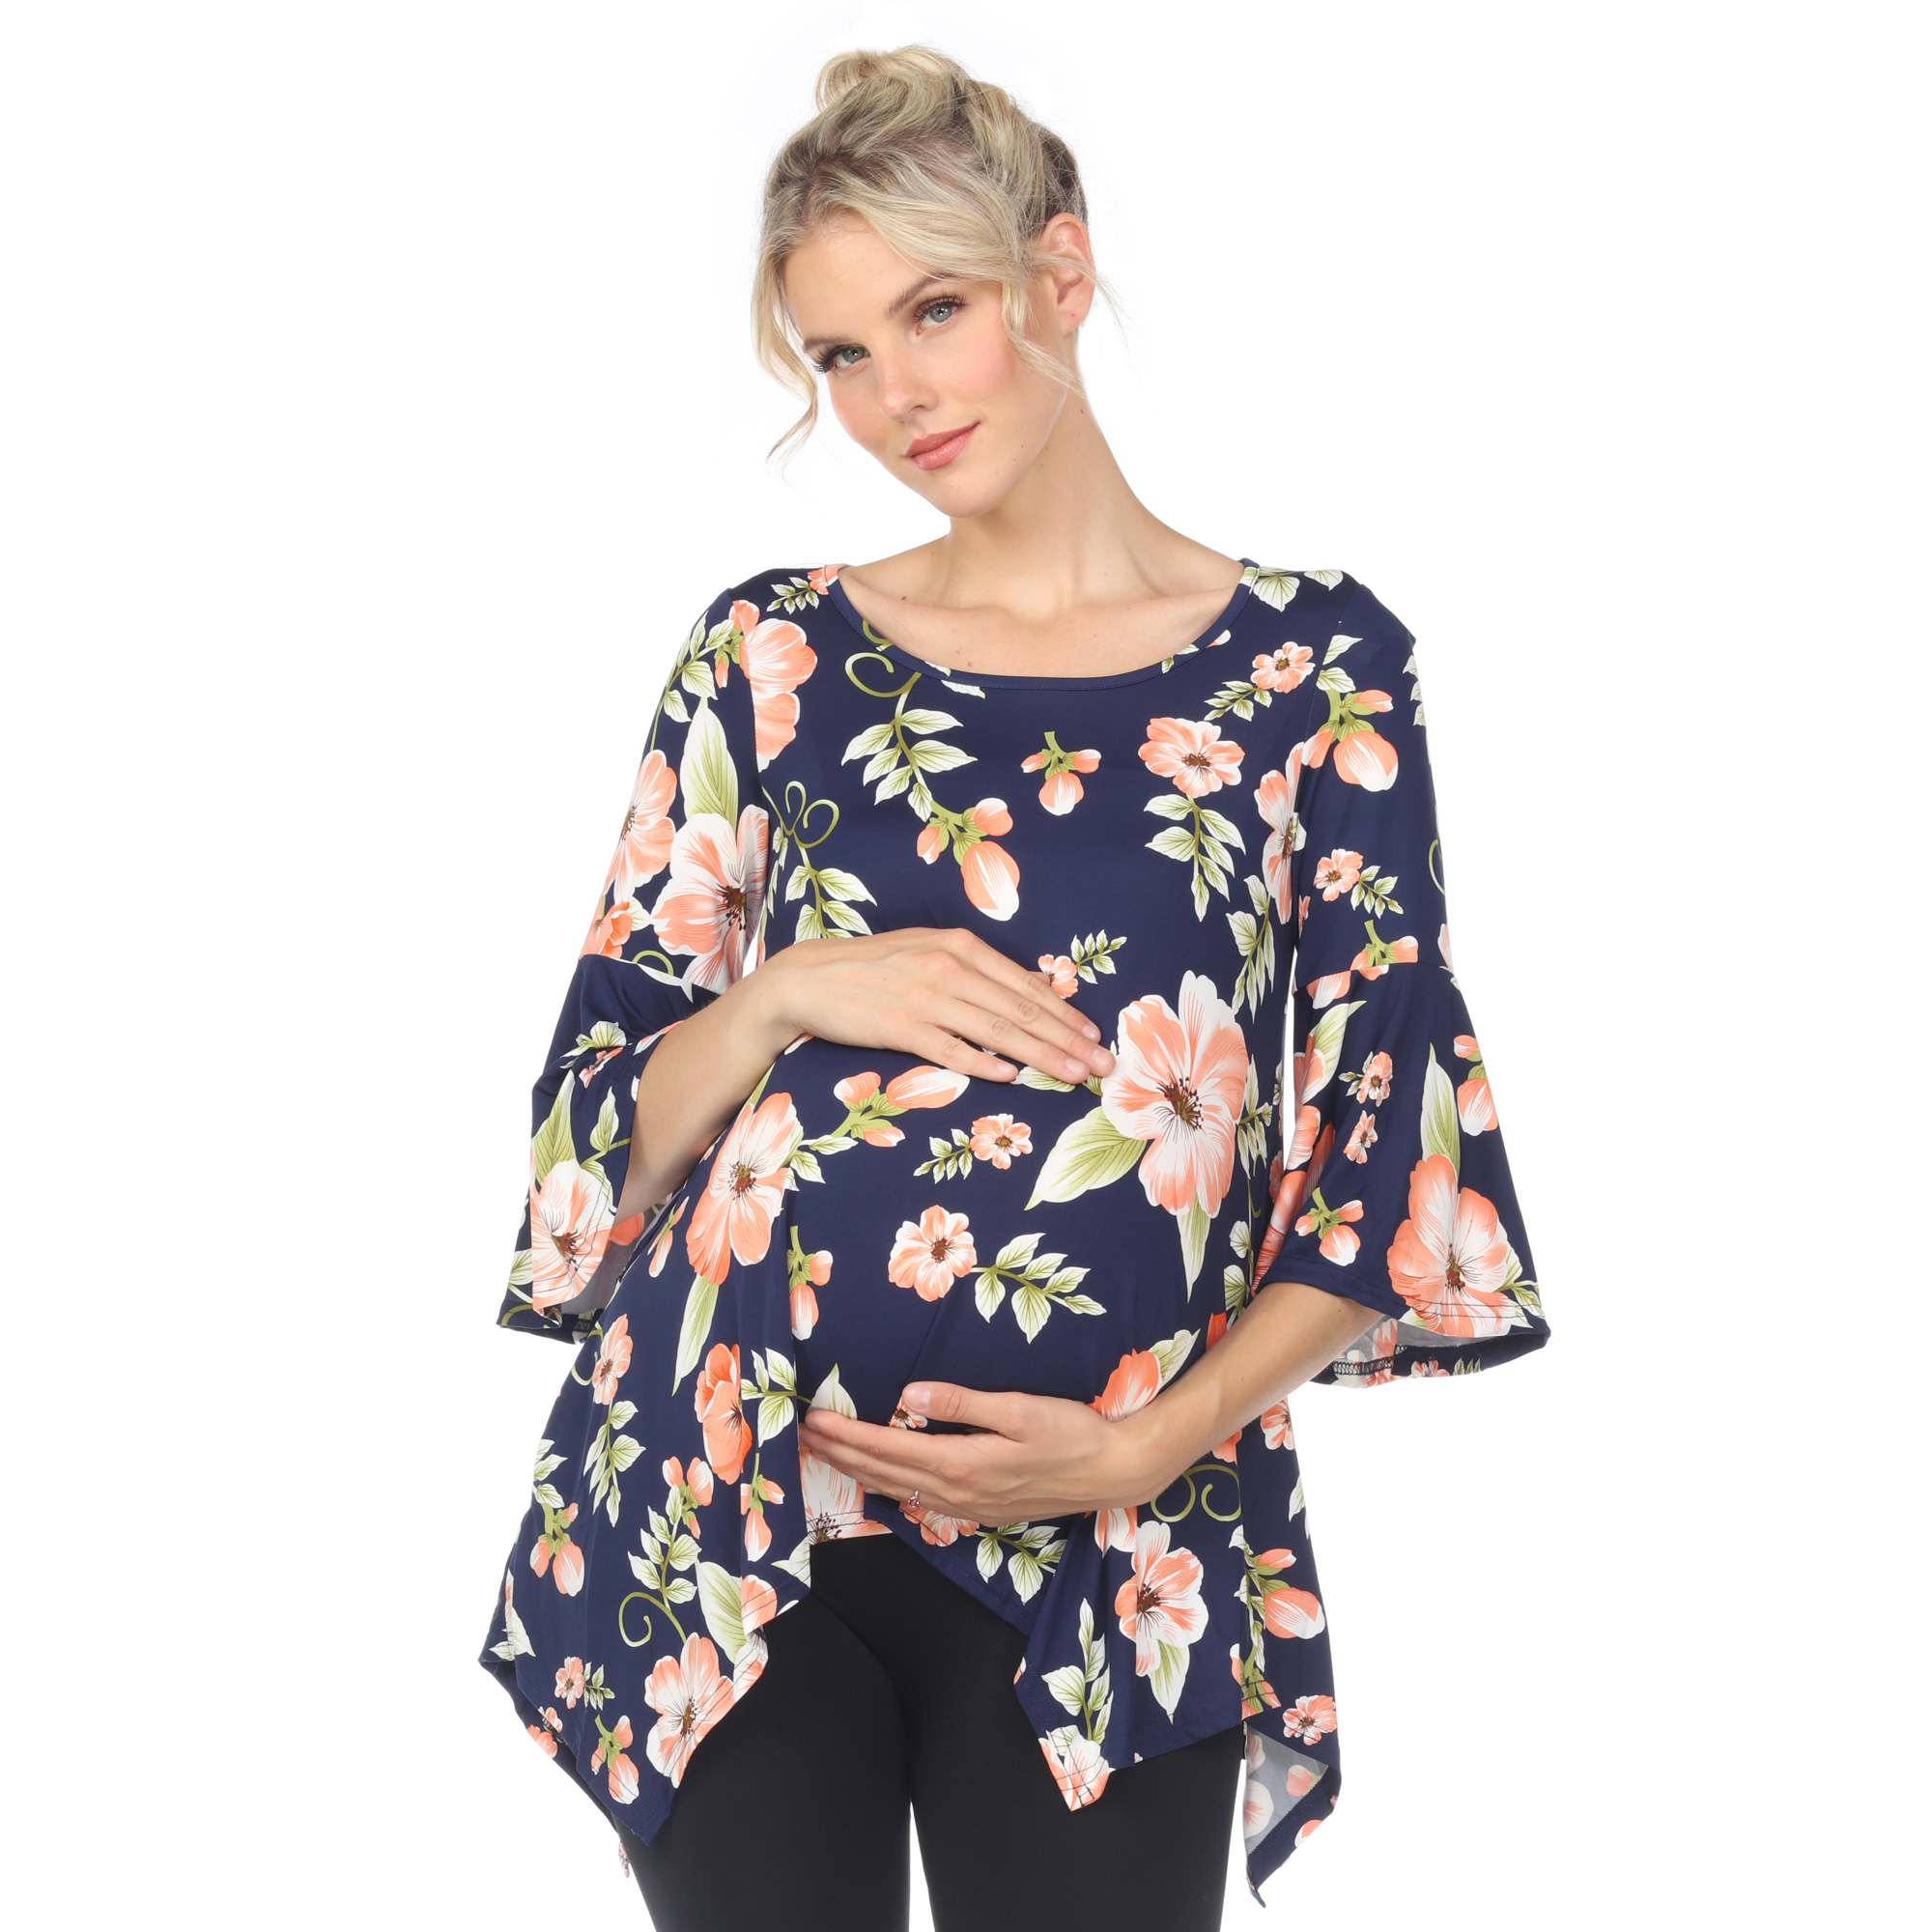 White Mark Women's Maternity Floral Print Quarter Sleeve Tunic Top With Pockets - Peach Flower, 3X